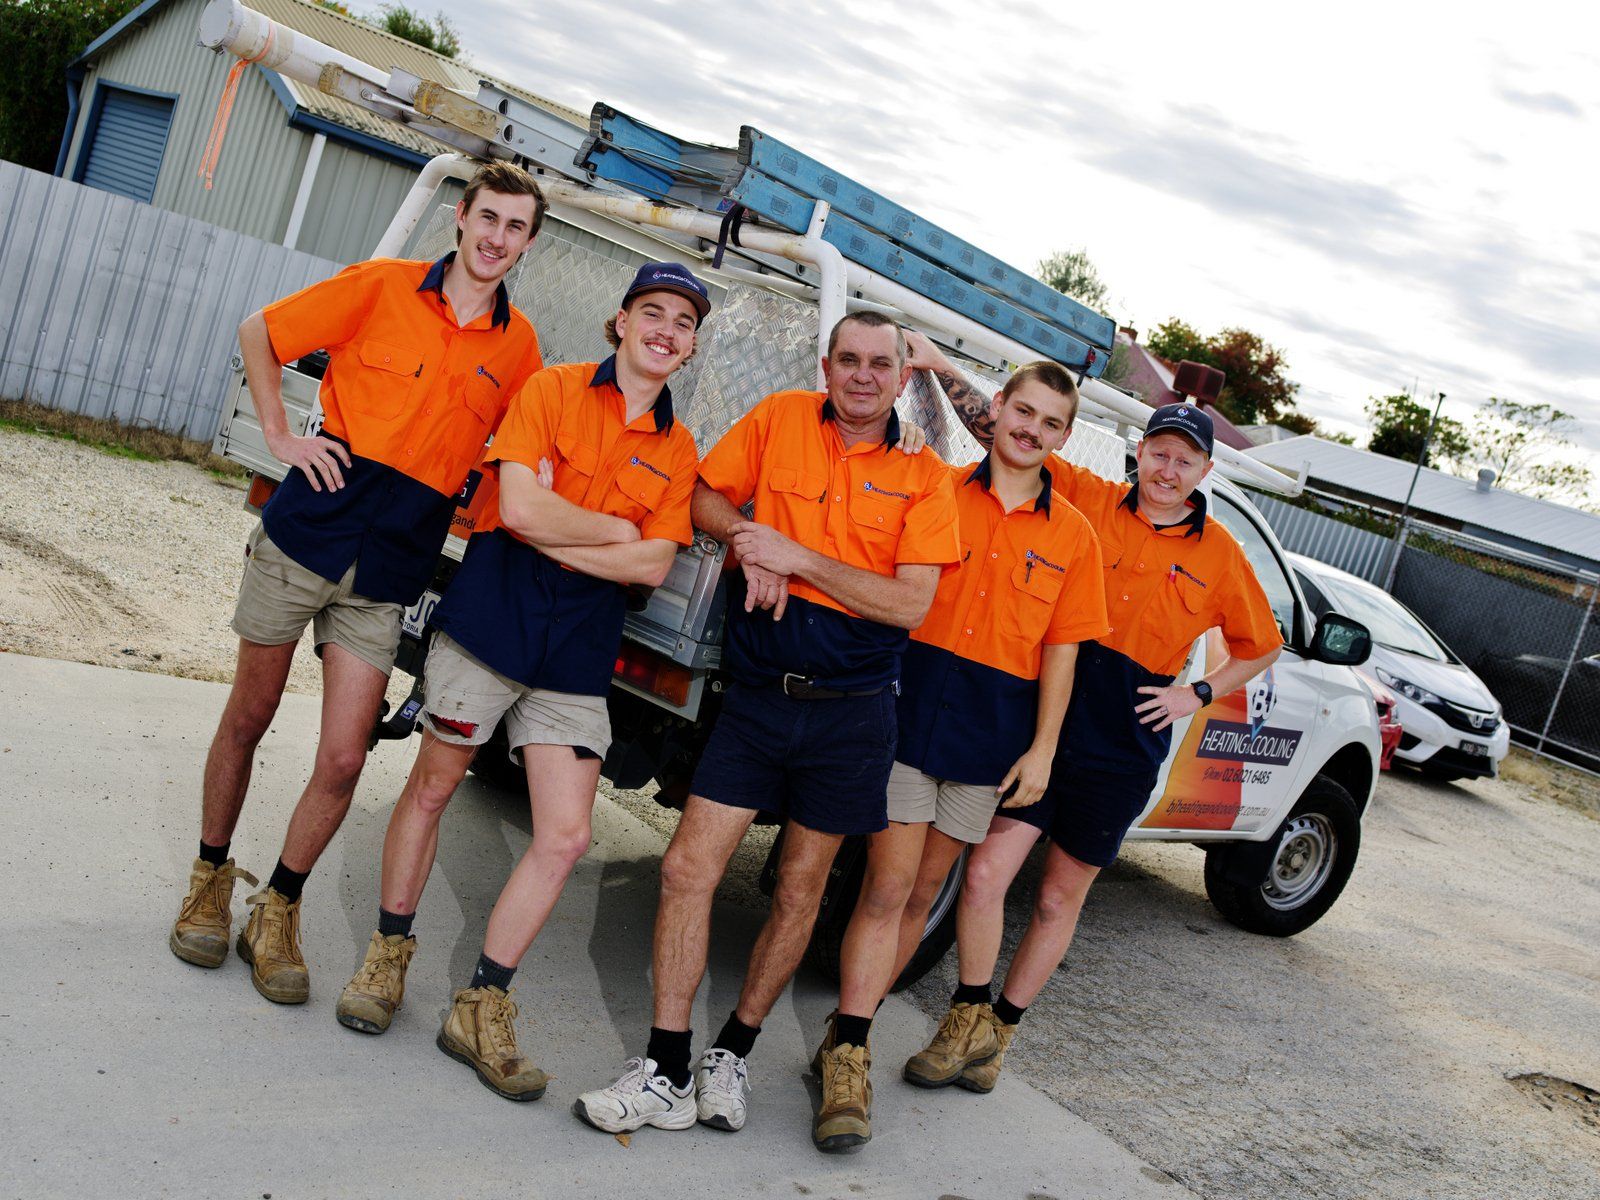 BJ Heating & Cooling Team — Air Conditioning & Heating in Albury, NSW